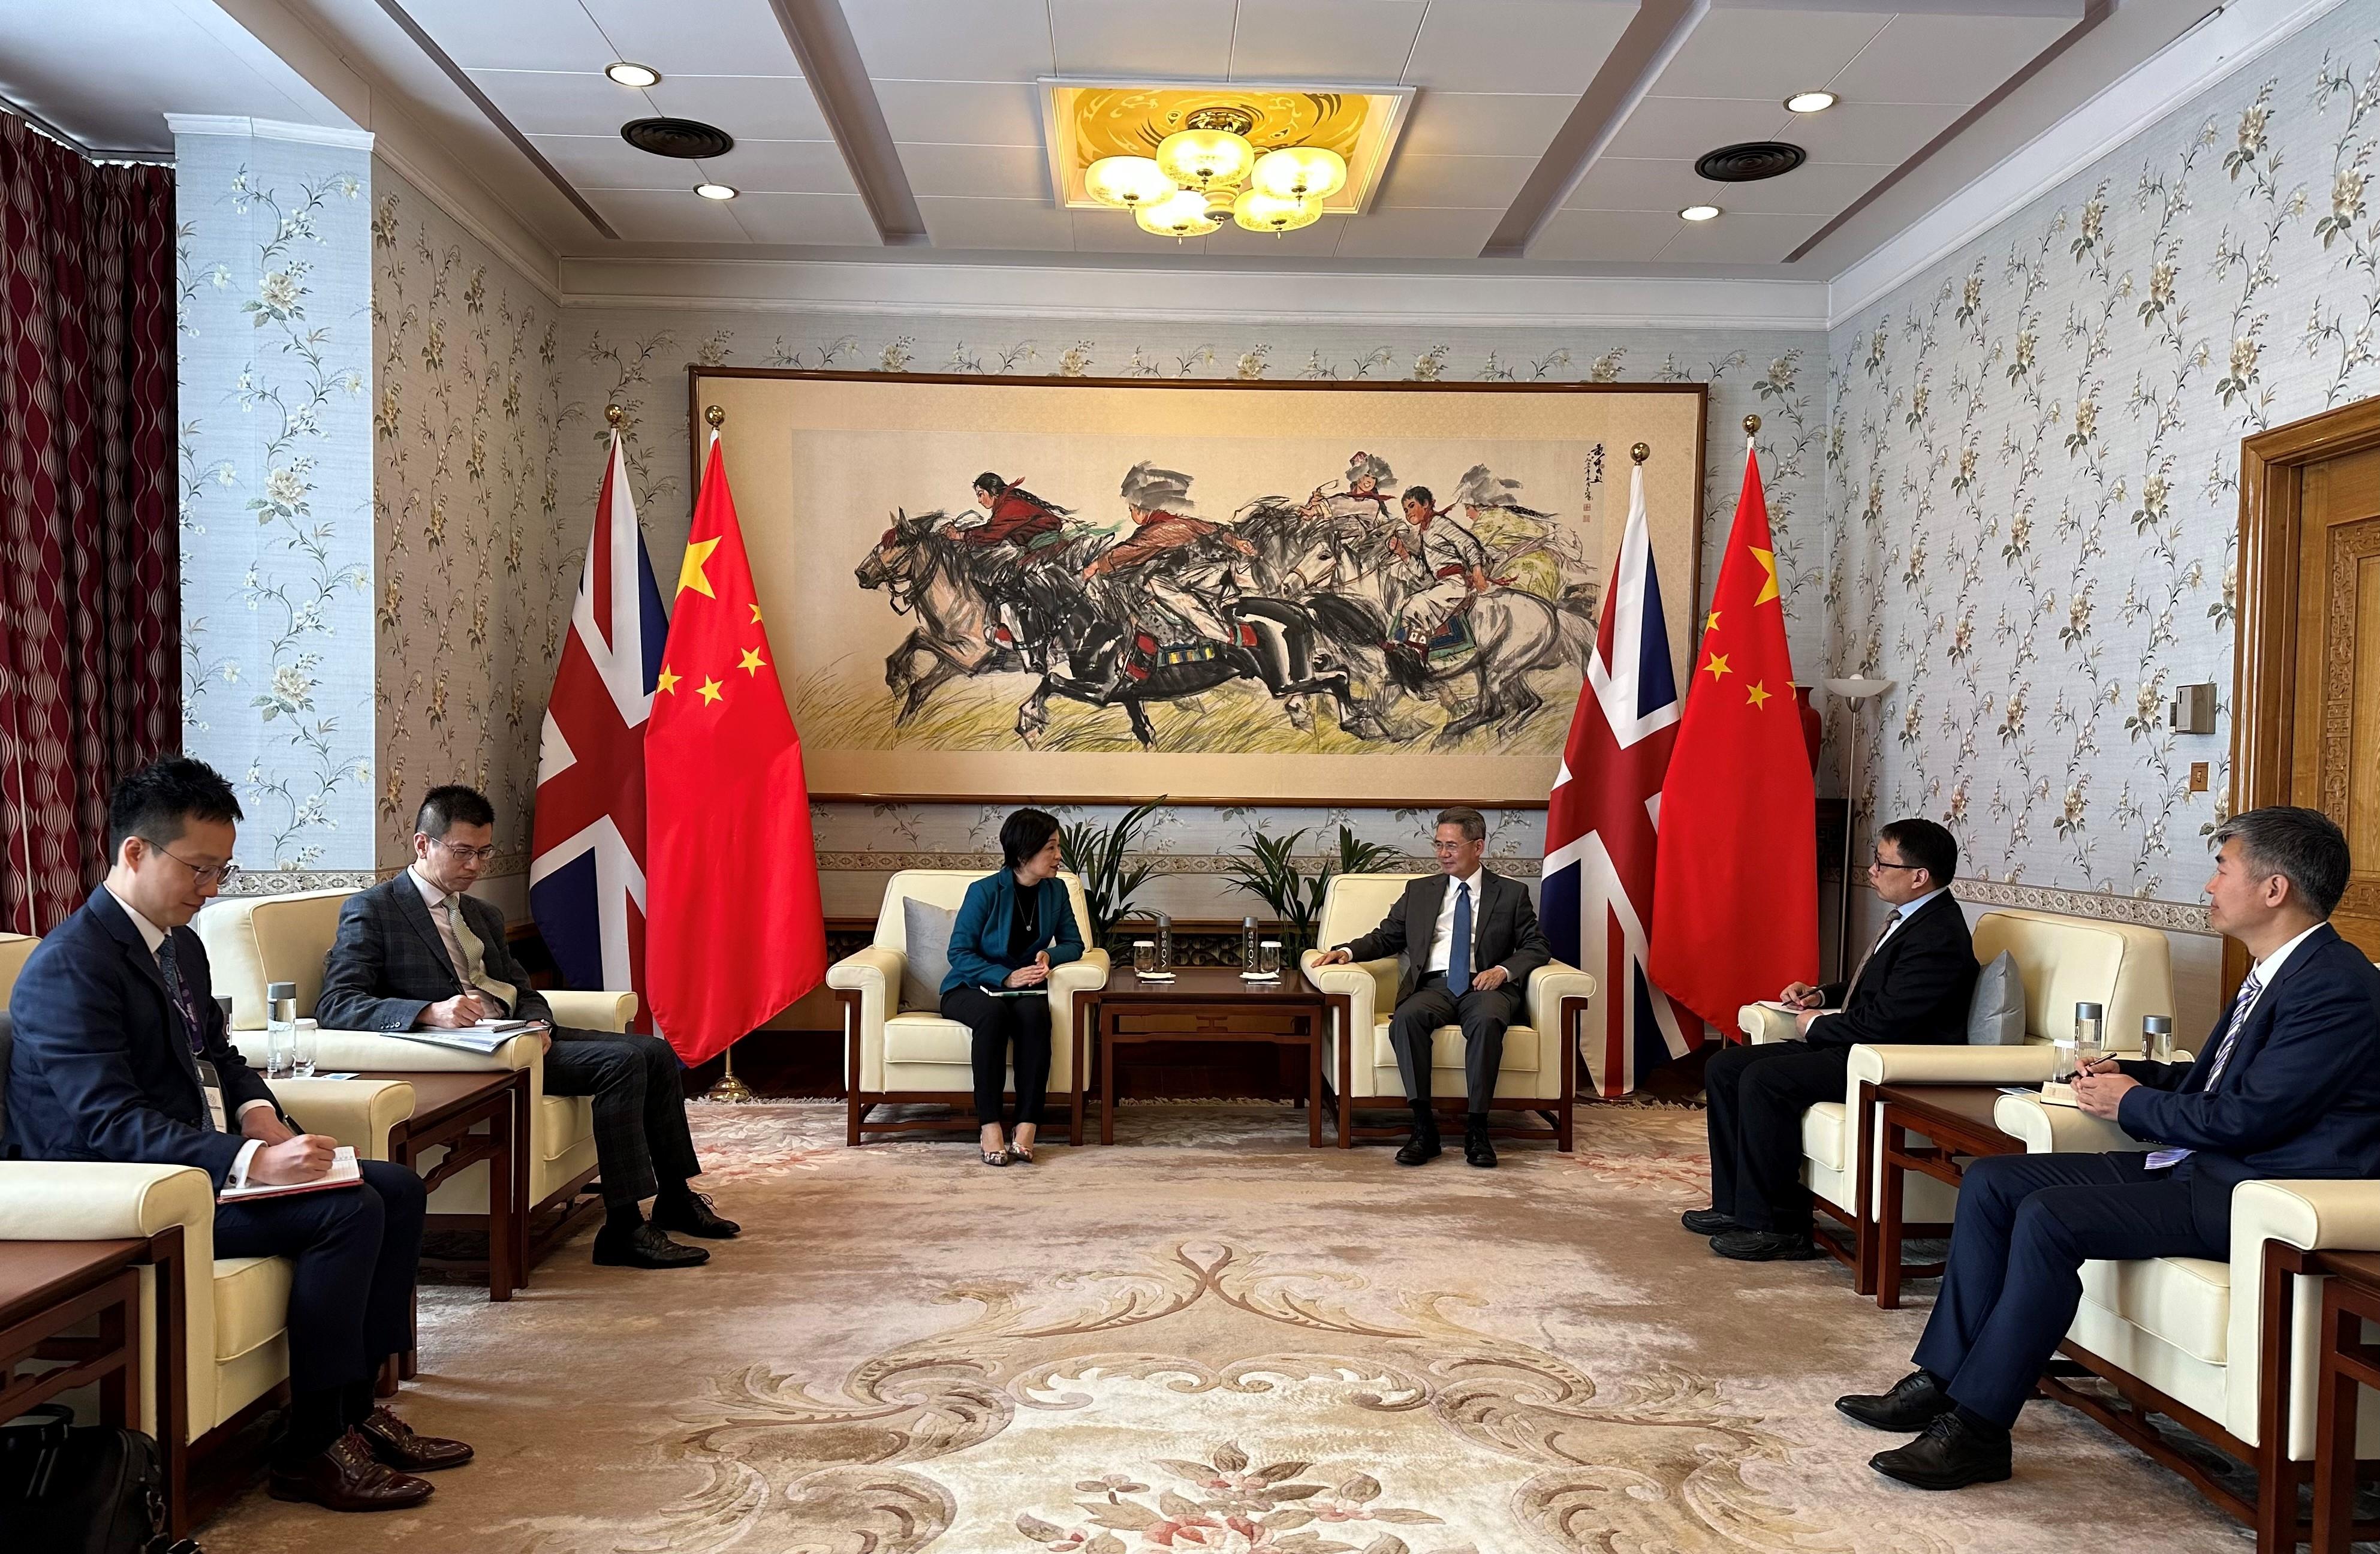 The Secretary for Education, Dr Choi Yuk-lin (third left), pays a courtesy call to the Chinese Ambassador to the UK, Mr Zheng Zeguang (third right), in London, the United Kingdom, on May 10 (London time).